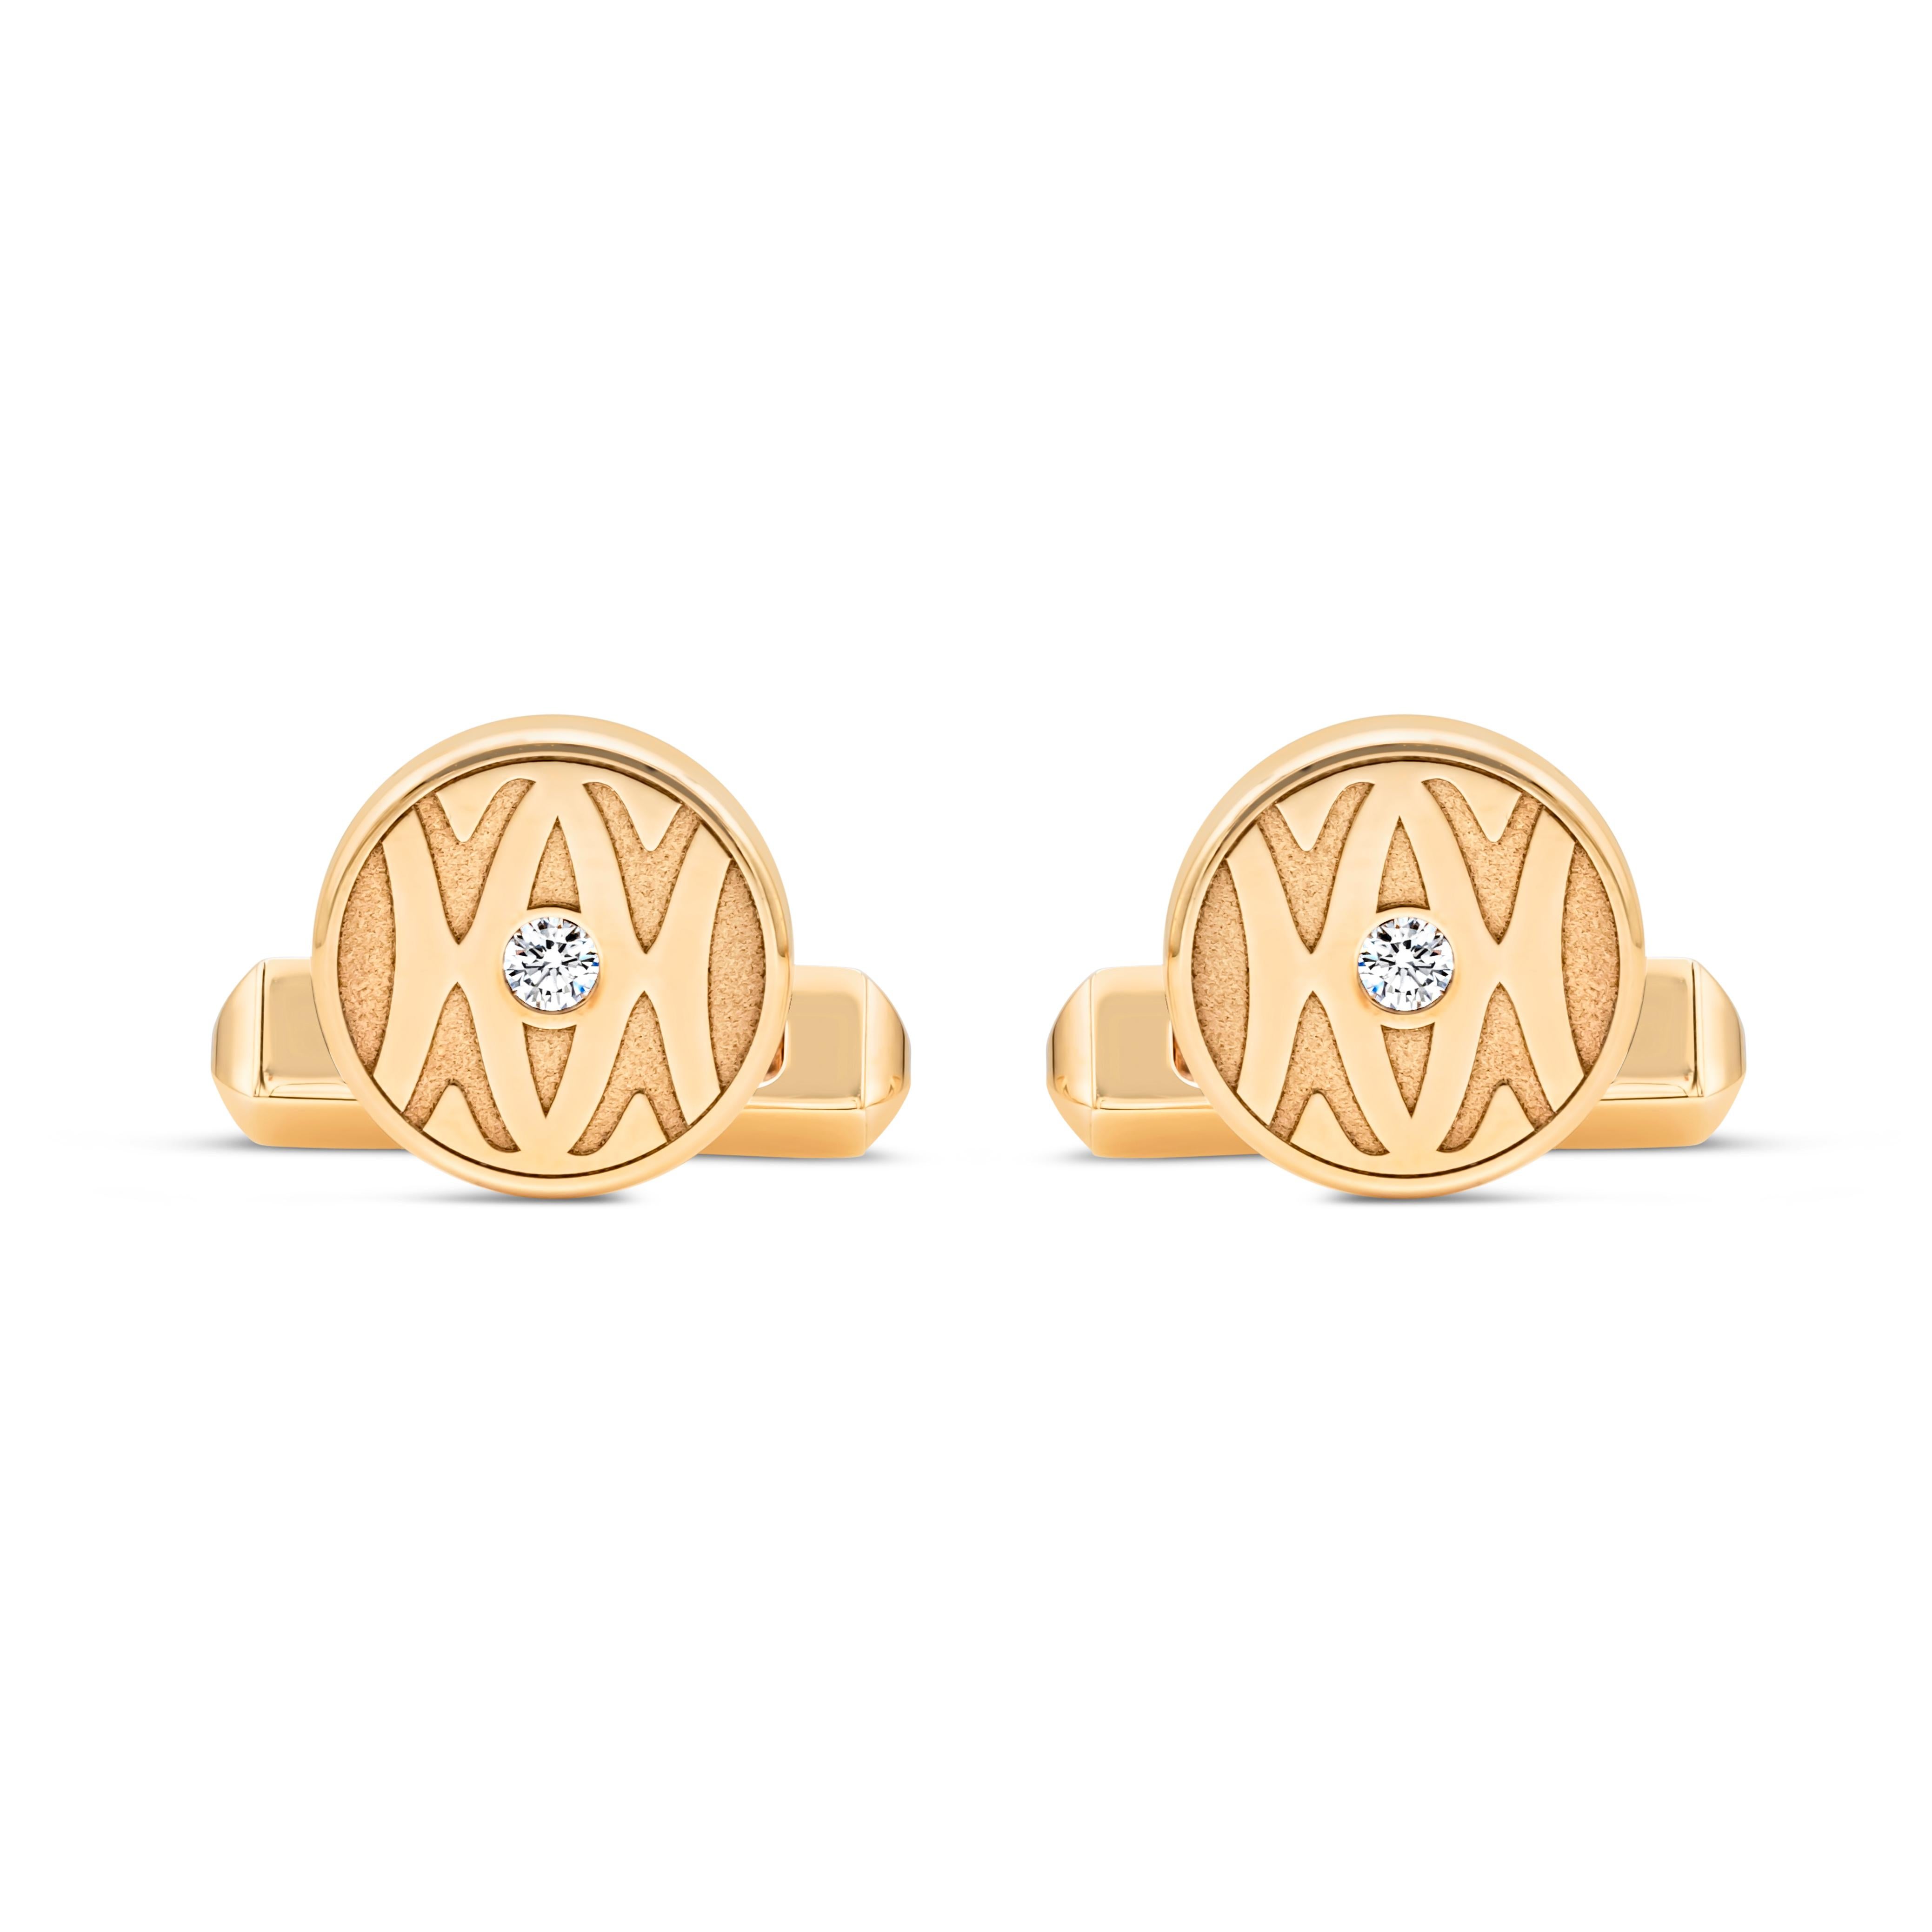 A dashing pair of cufflinks created by Cartier, featuring round brilliant cut diamonds weighing 0.14 carat total with E color and VS clarity set in the middle of an 18K yellow gold round face. These cufflinks feature the famous Cartier logo and a